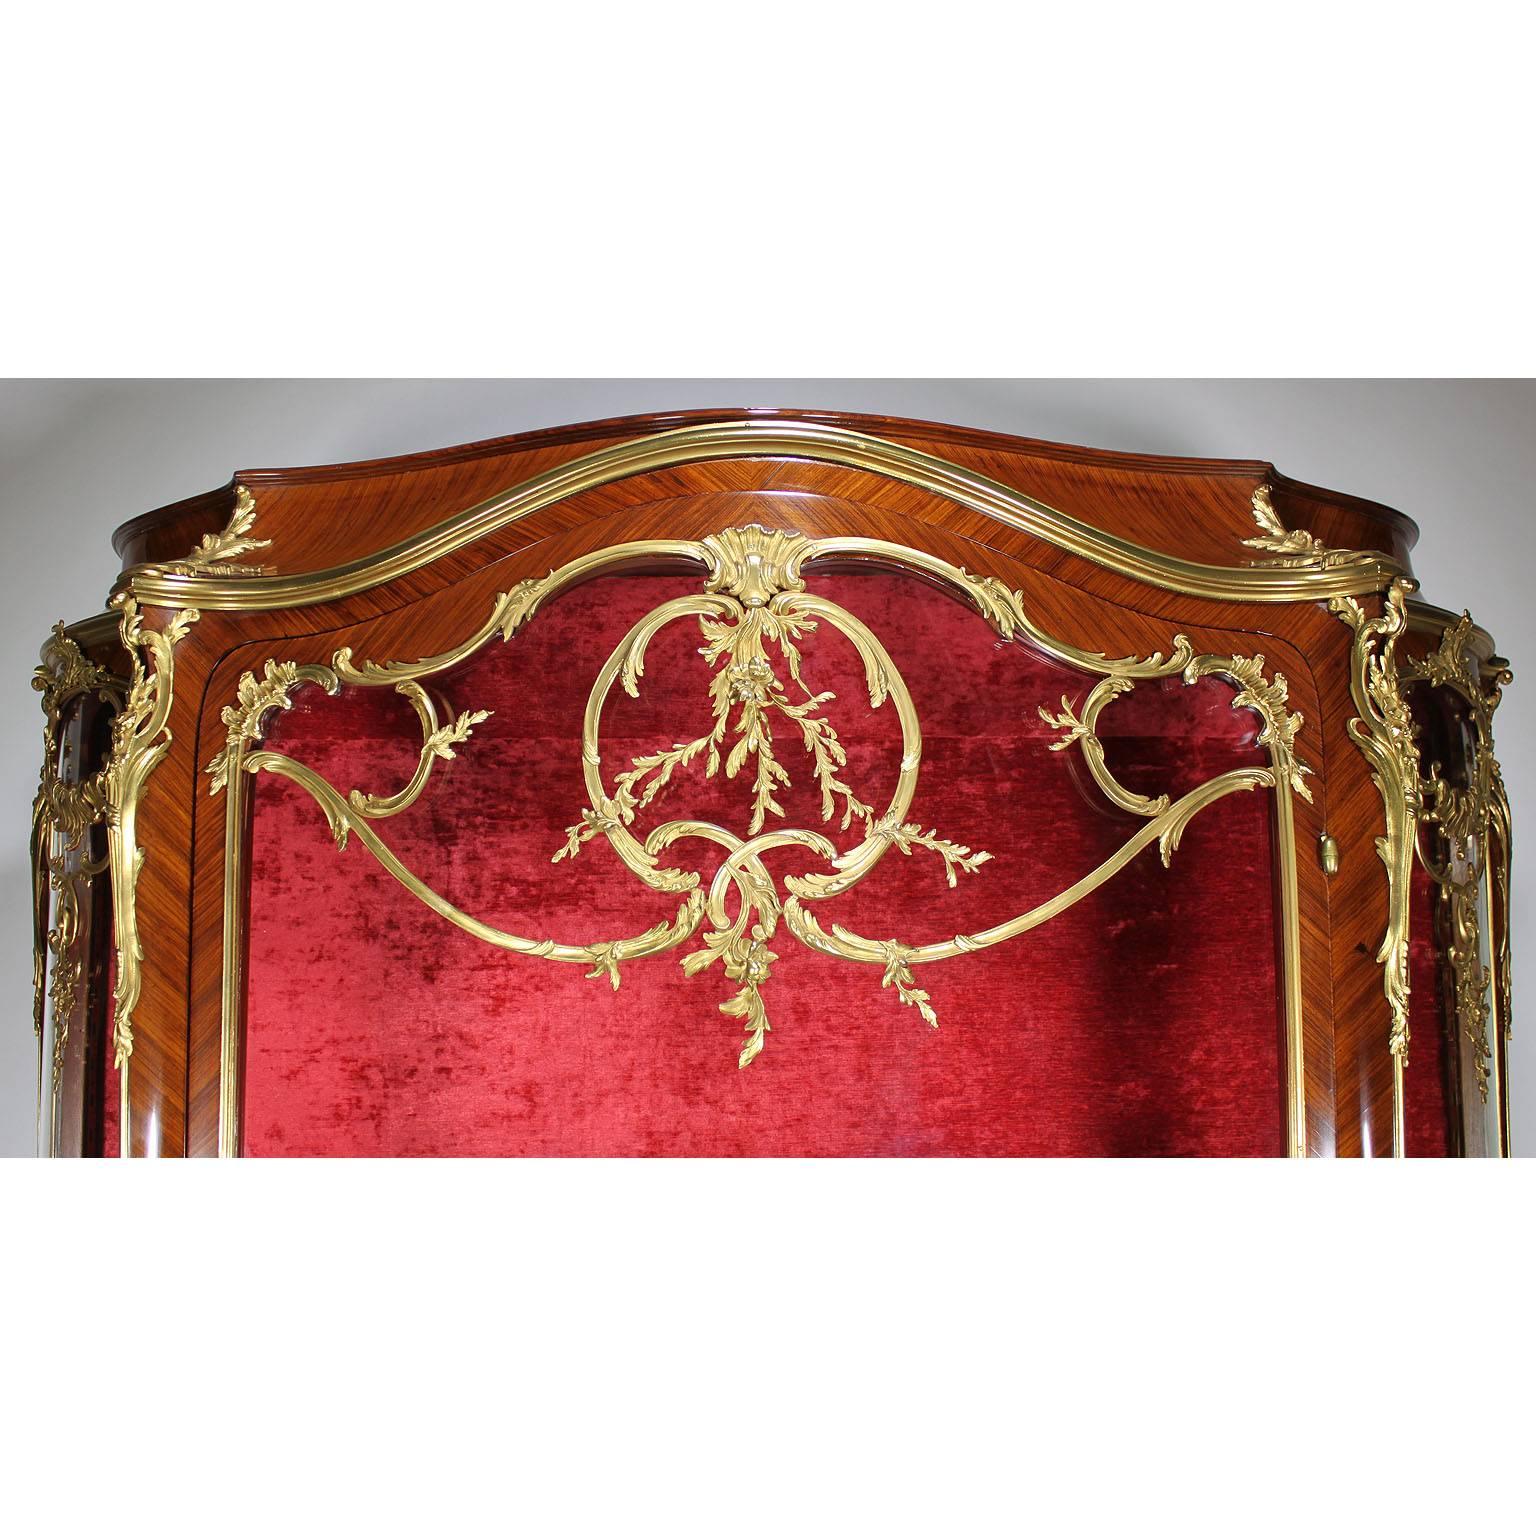 Gilt French 19th-20th Century Louis XV Style Kingwood and Ormolu Mounted Vitrine For Sale